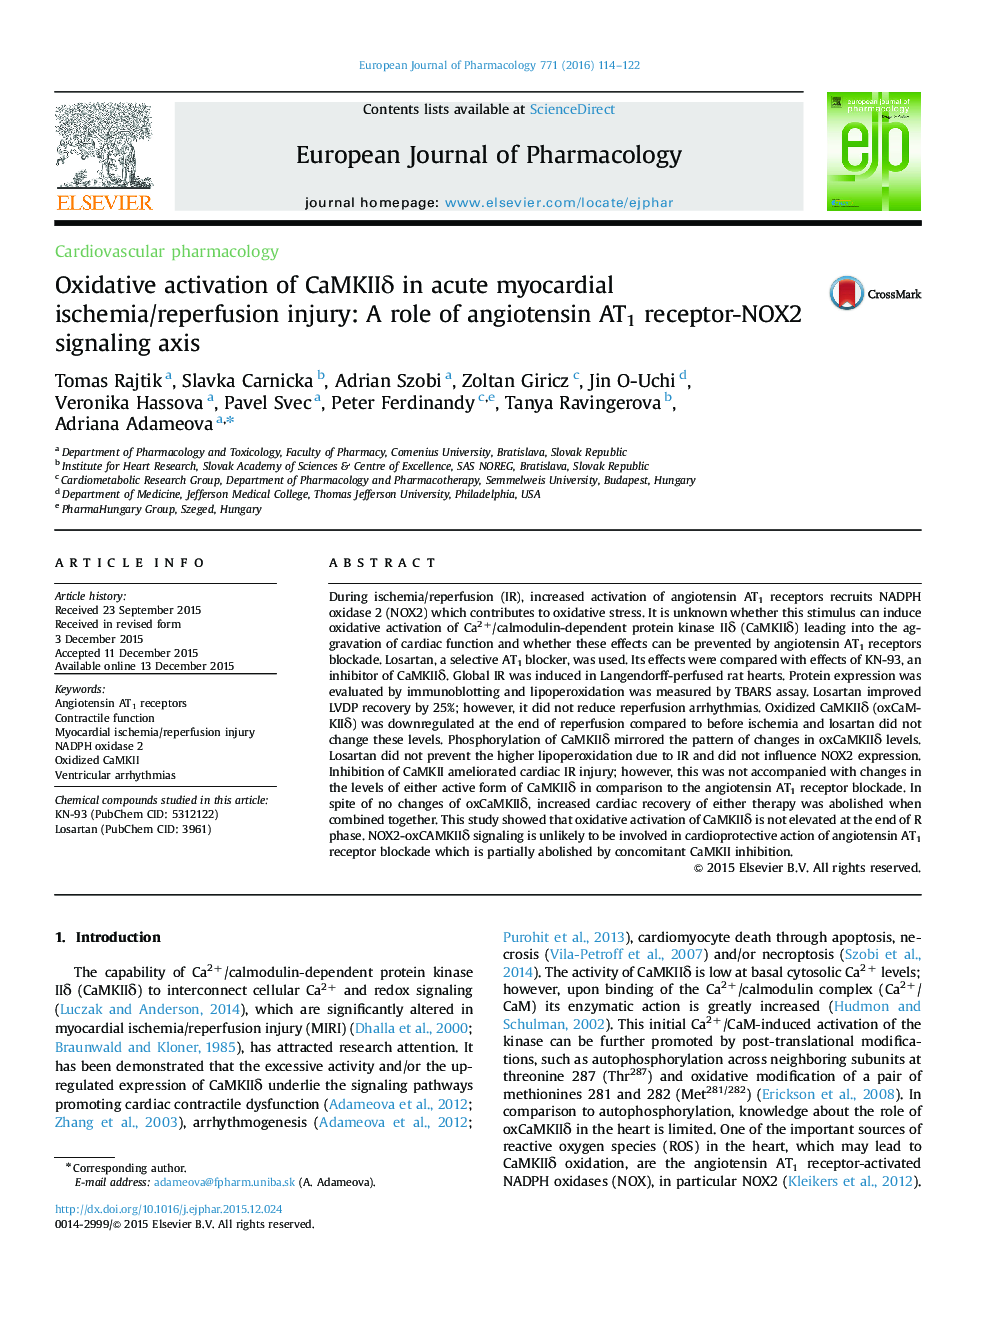 Oxidative activation of CaMKIIδ in acute myocardial ischemia/reperfusion injury: A role of angiotensin AT1 receptor-NOX2 signaling axis